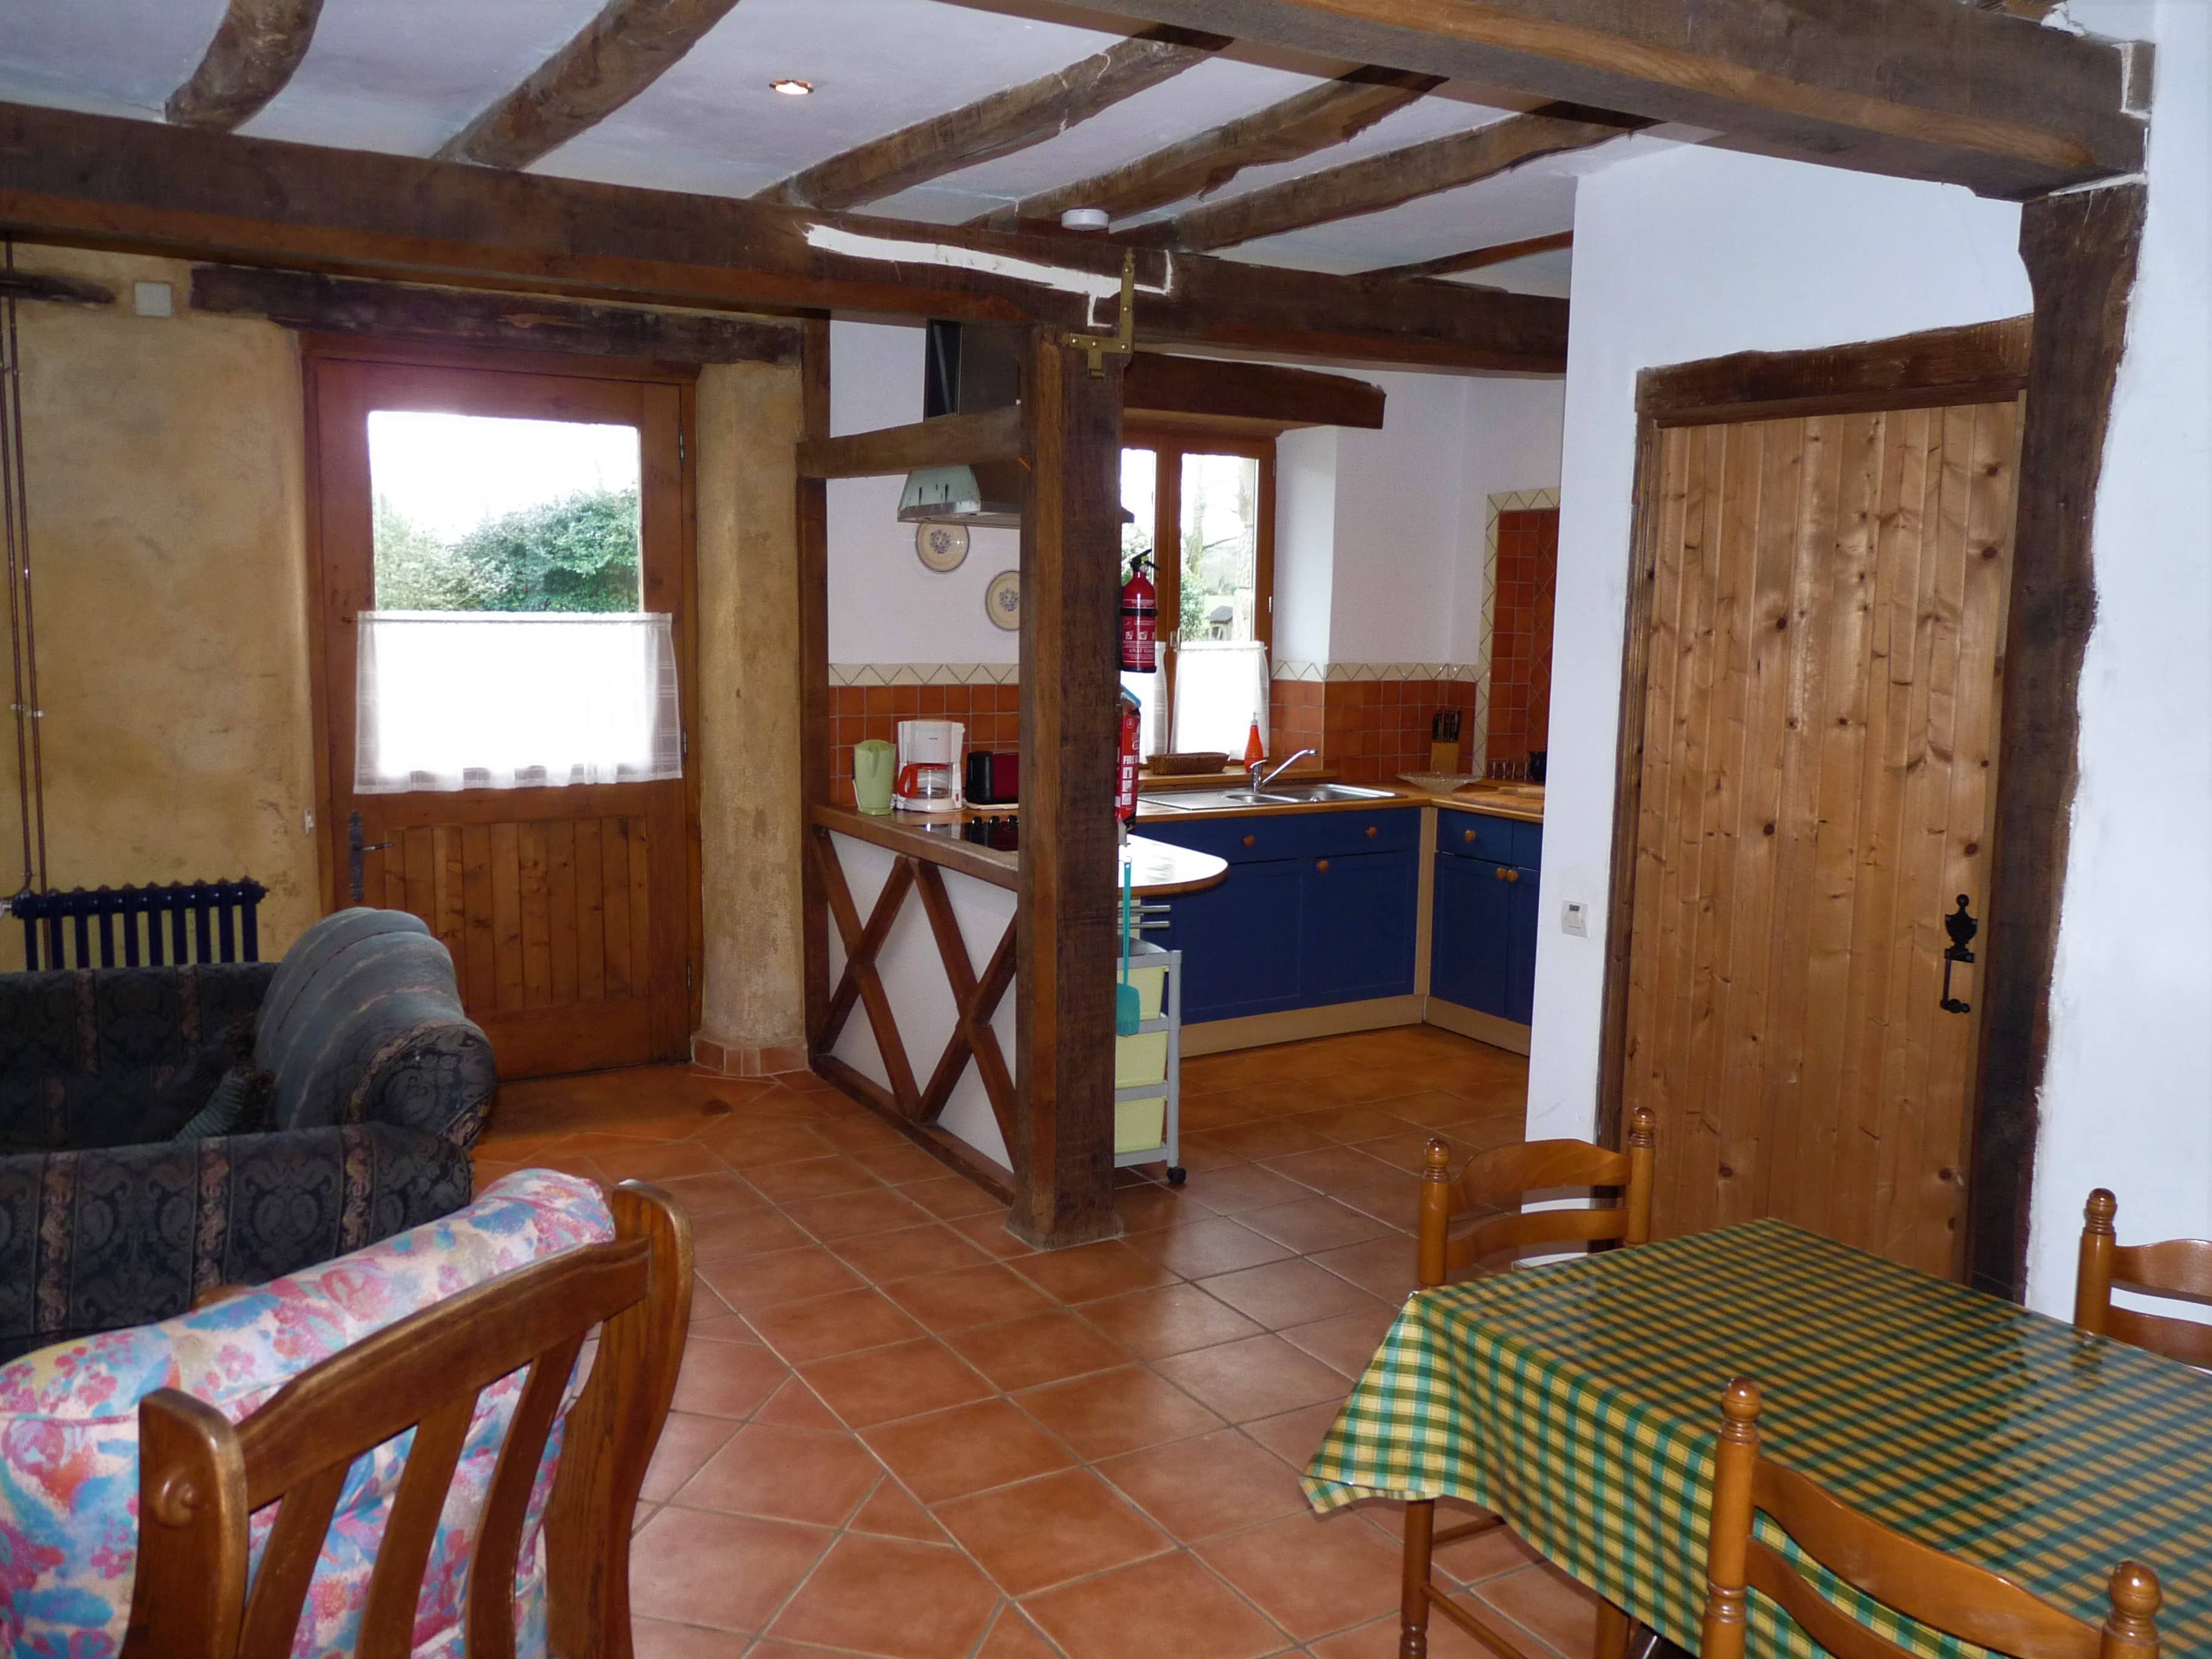 Bright and spacious dining room of La Julerie cottage in Brittany, France, featuring a large wooden table, comfortable chairs, and a fireplace. The room is beautifully decorated with rustic elements and offers stunning views of the surrounding countryside. Perfect for enjoying meals with family or friends during a holiday in Brittany.